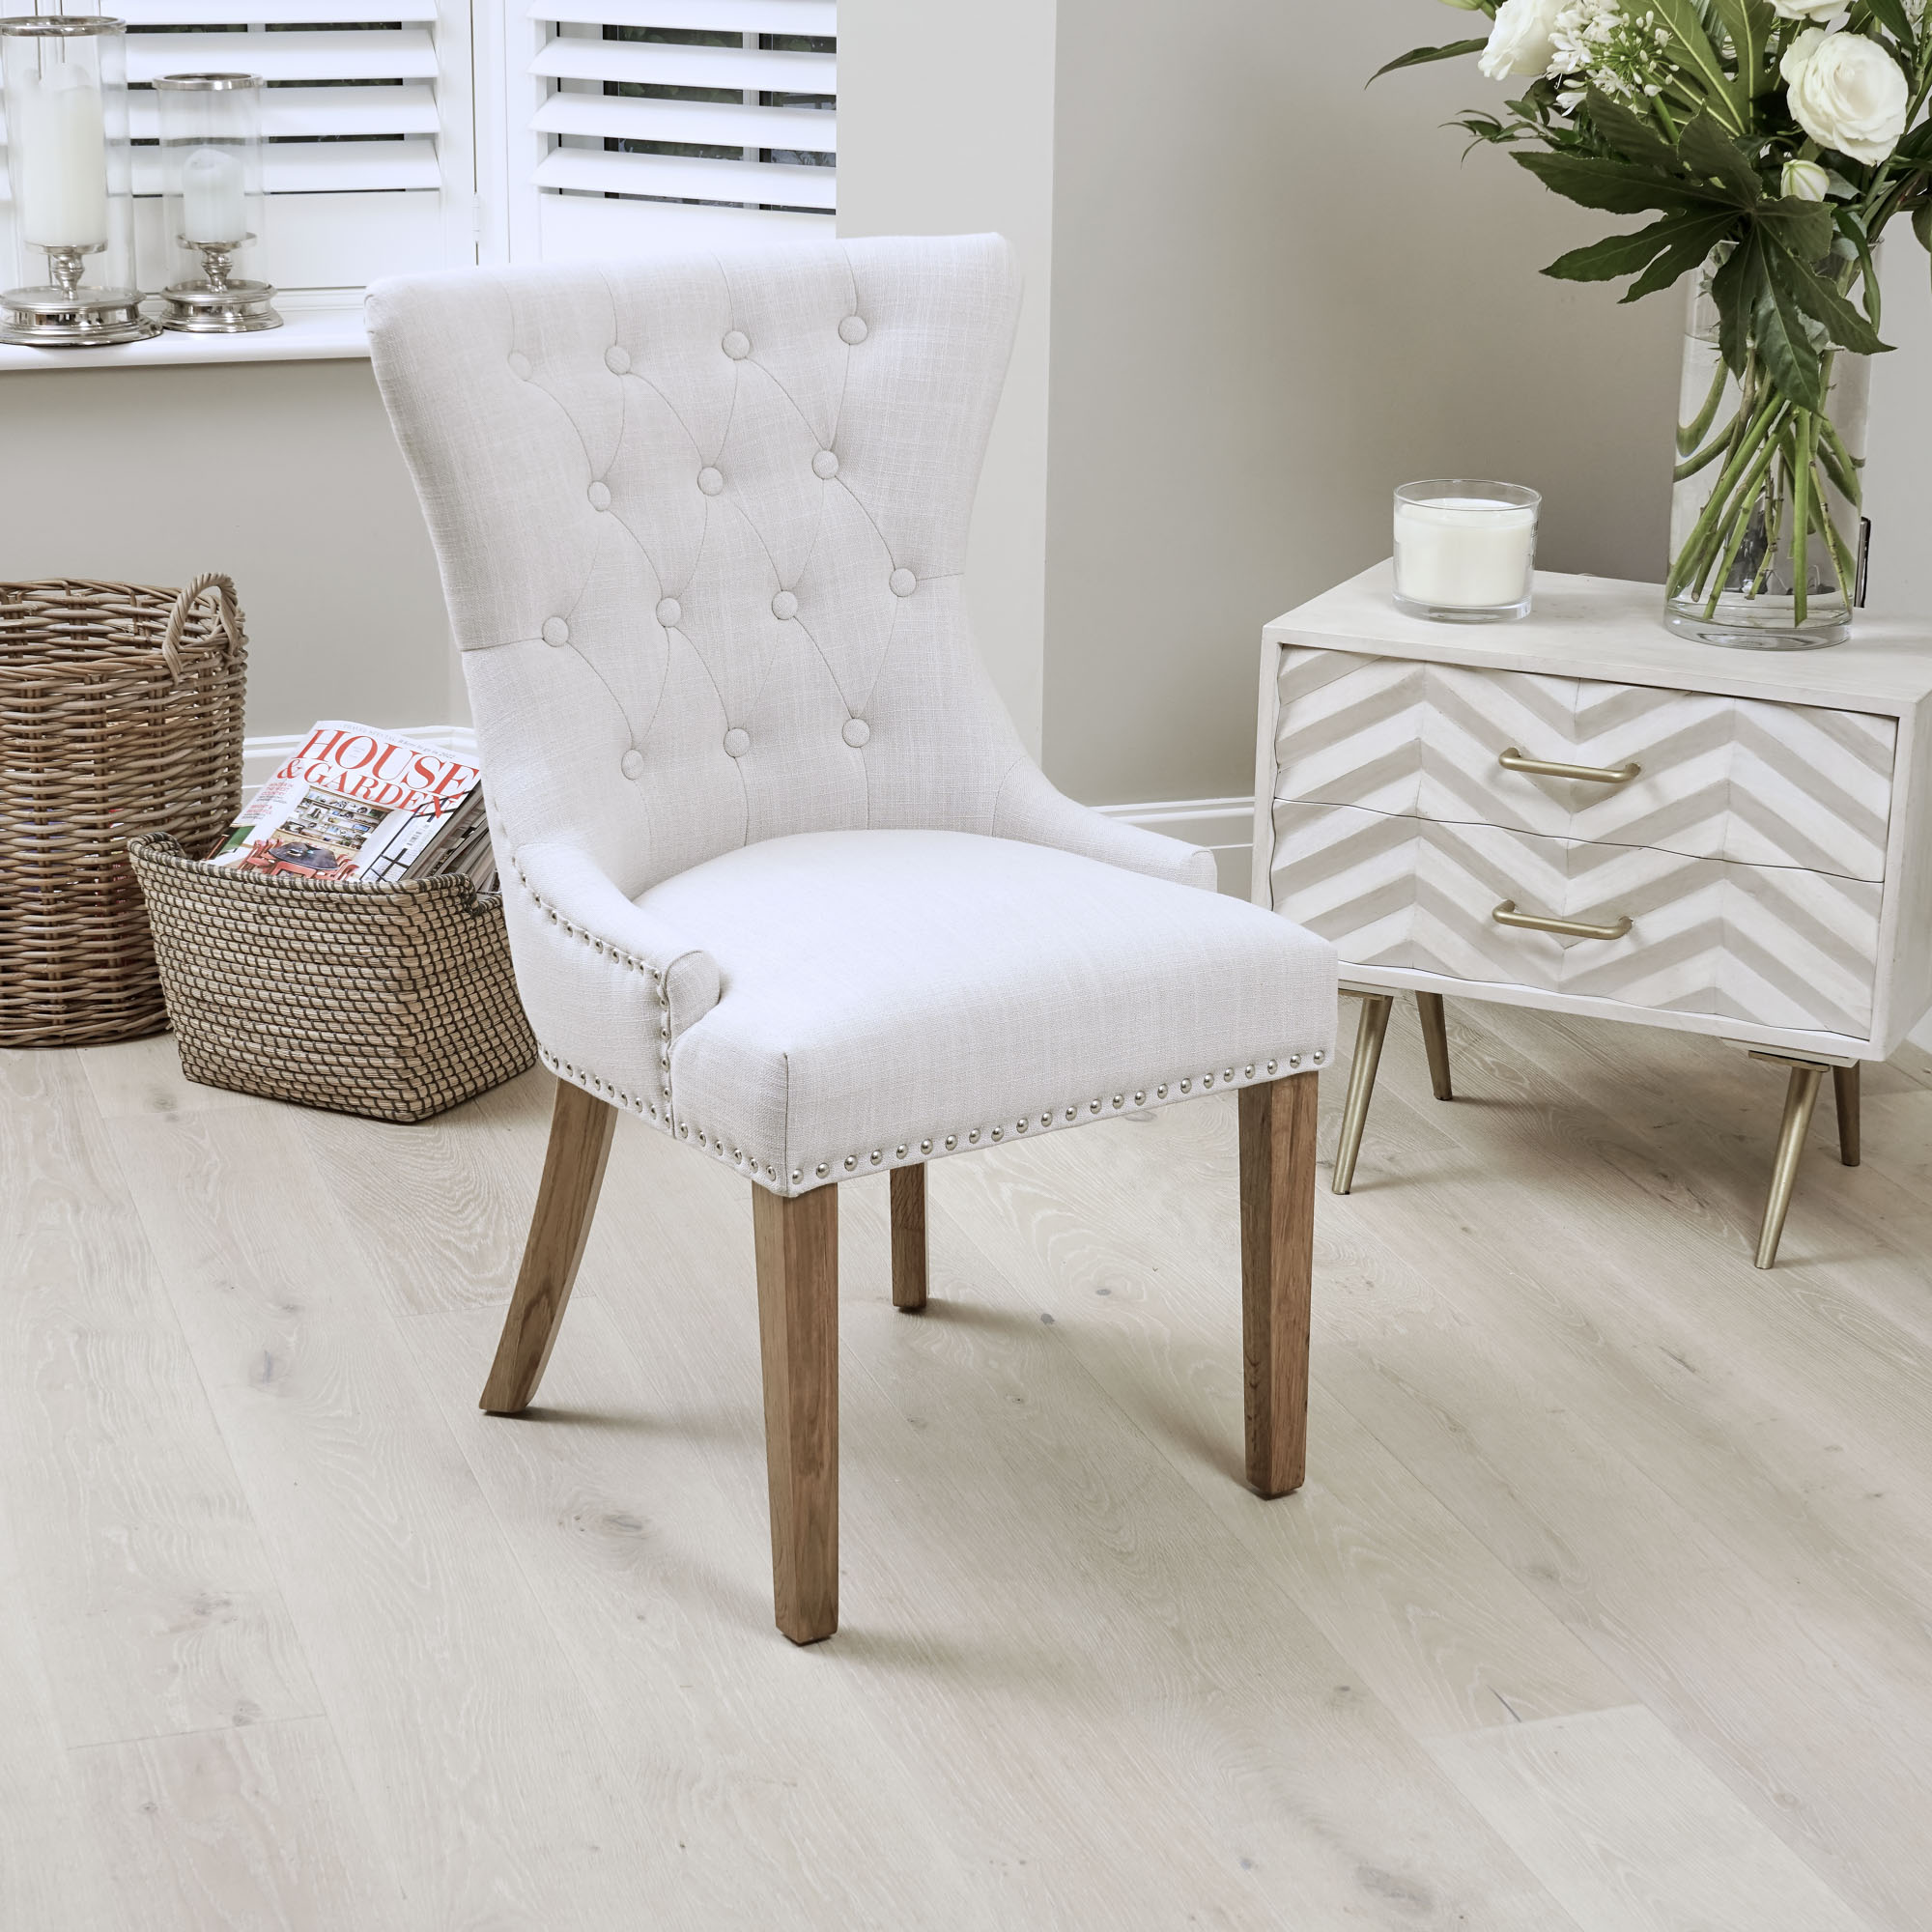 CLEARANCE: Knightsbridge Natural Linen Dining Chair with Hoop